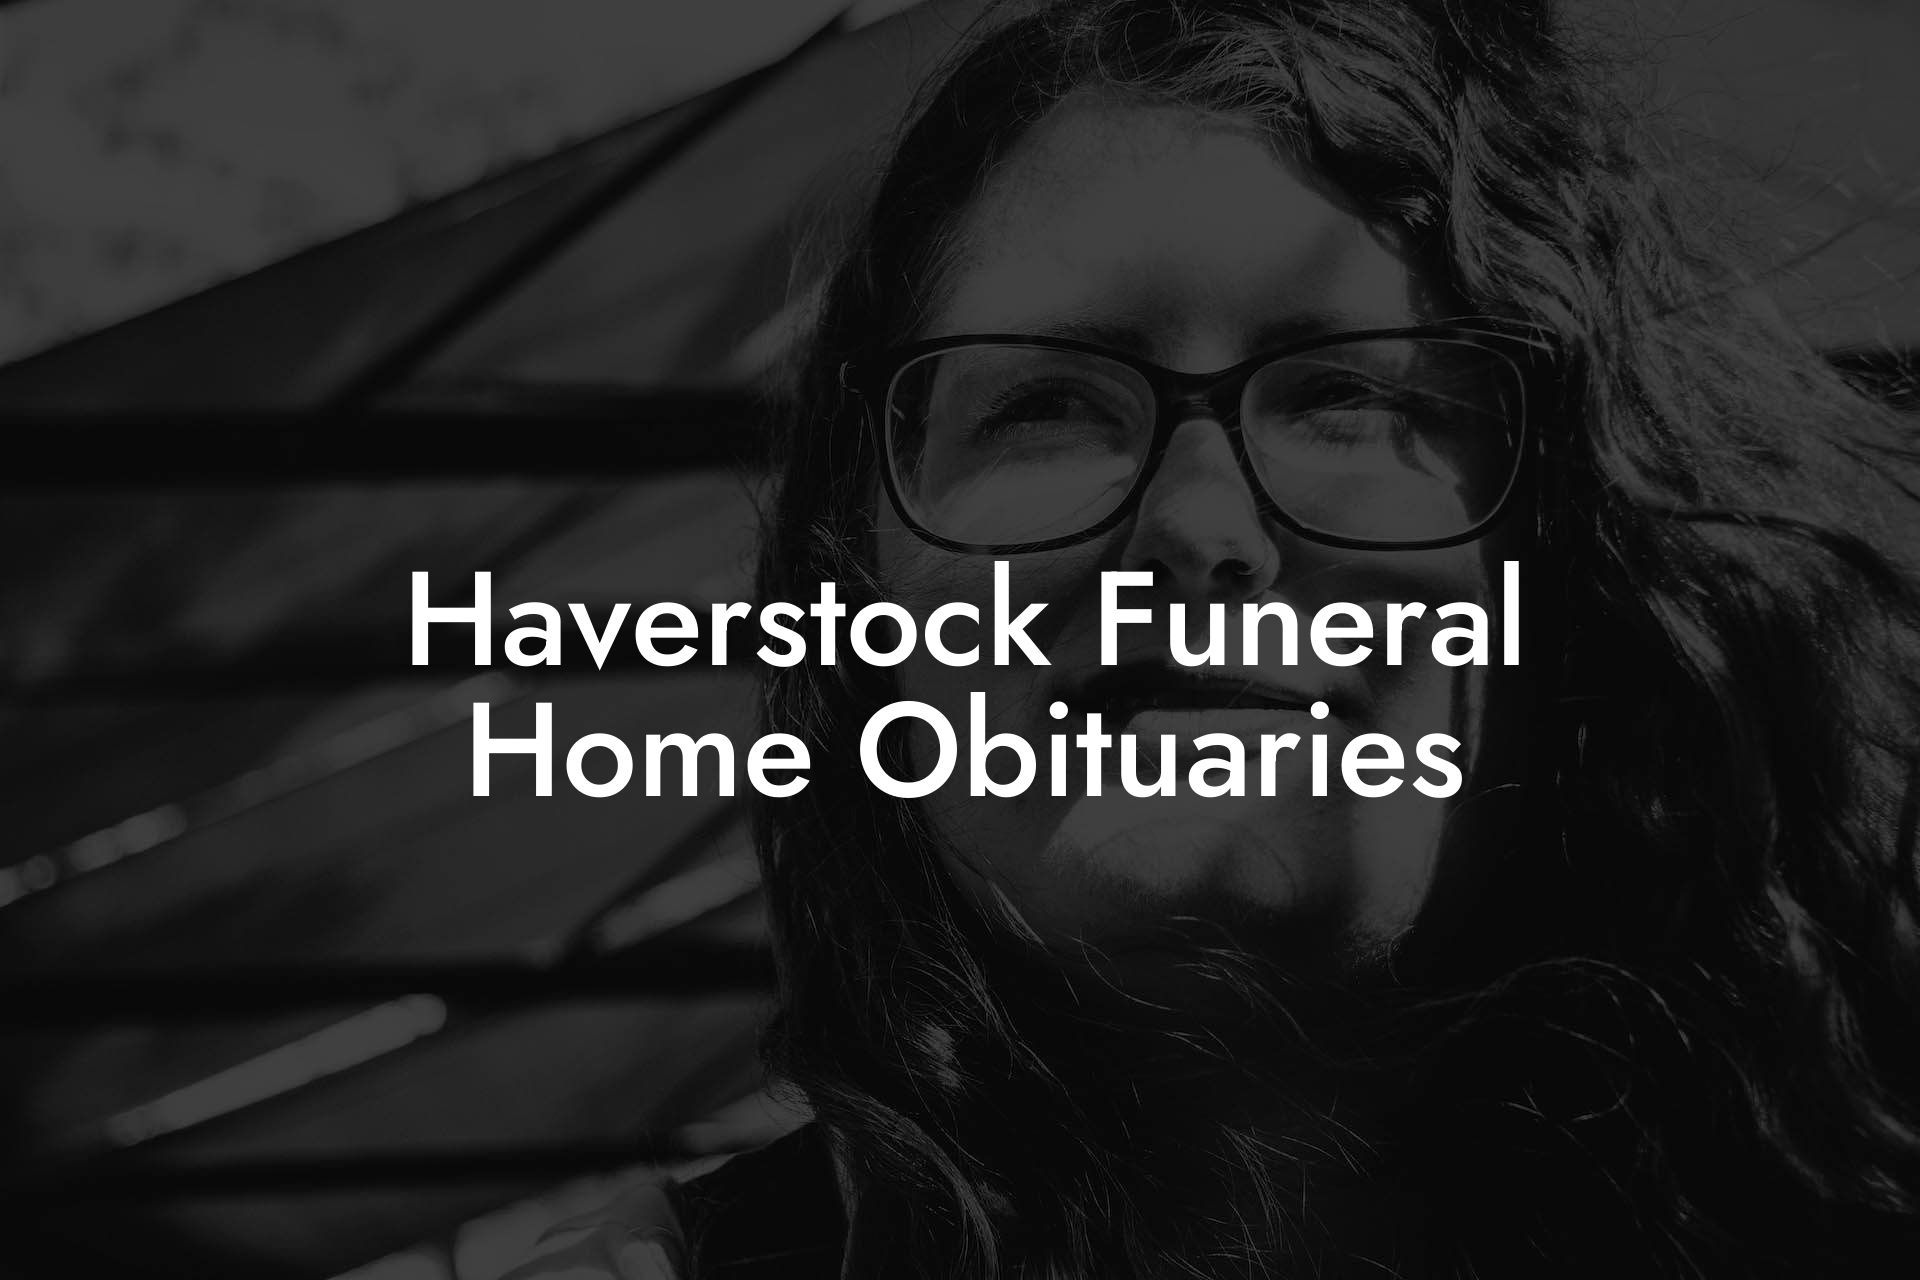 Haverstock Funeral Home Obituaries